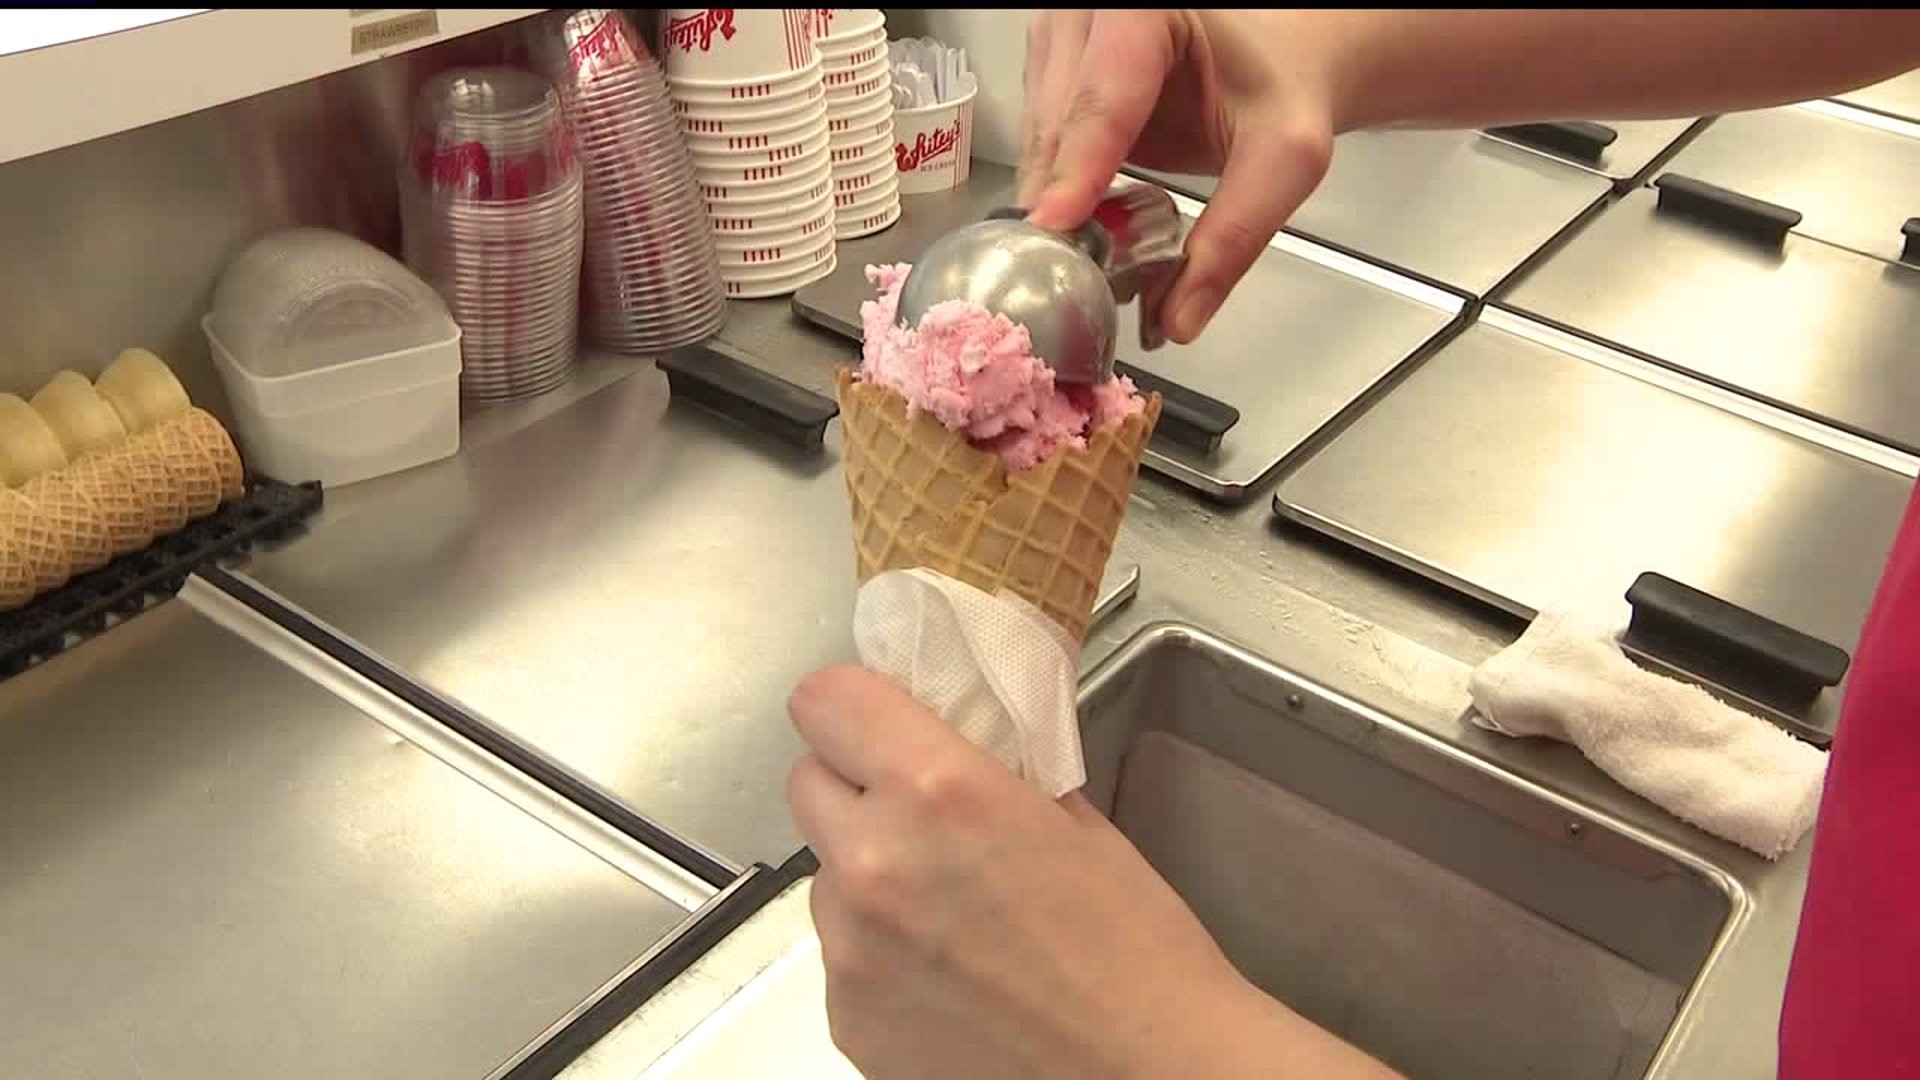 How eating ice cream can help Quad City kids